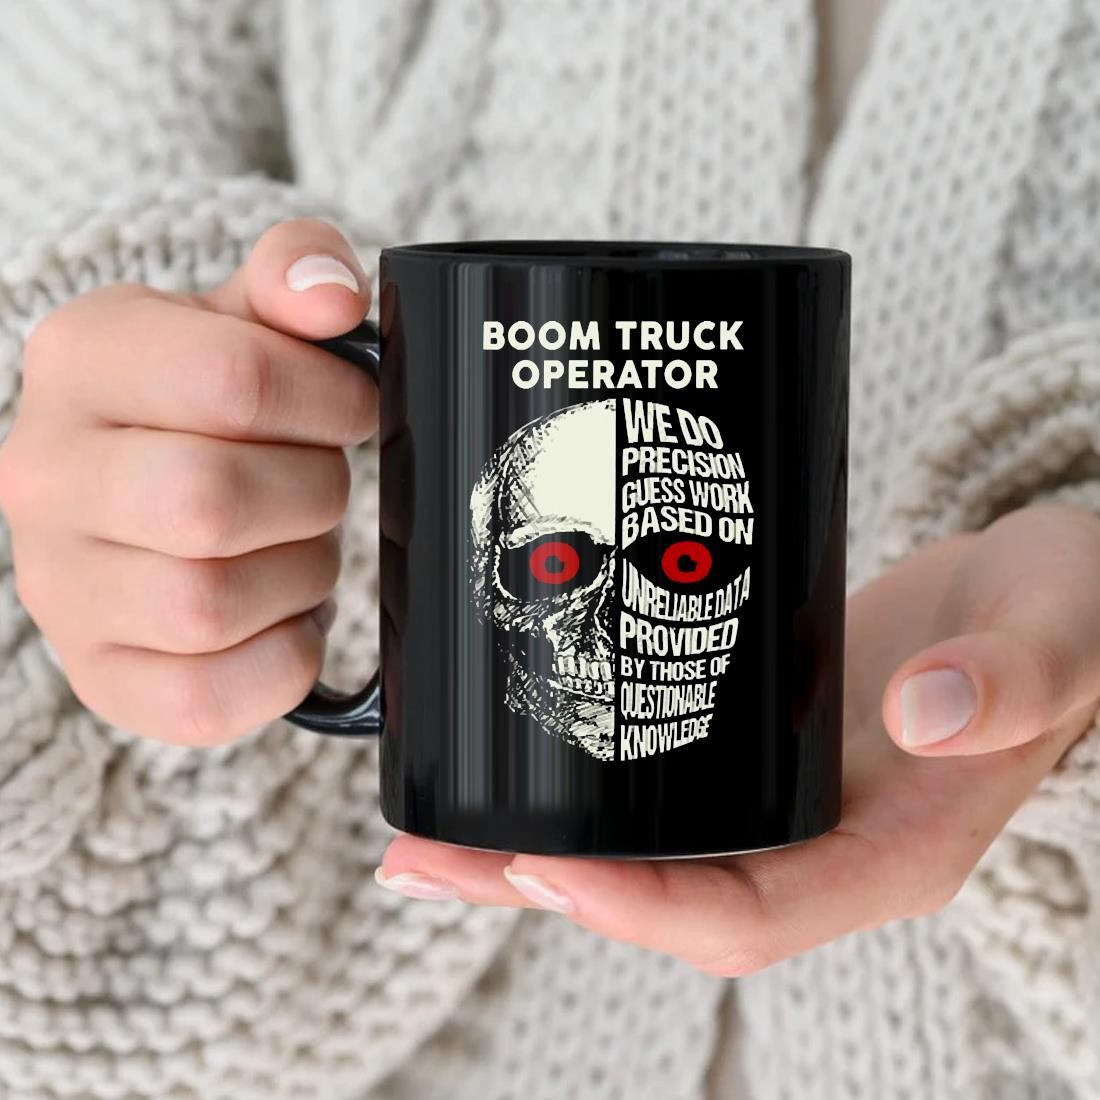 Boom Truck Operator We Do Precision Guess Work Based On Unreliable Data Provided By Those Of Questionable Knowledge Skull Mug